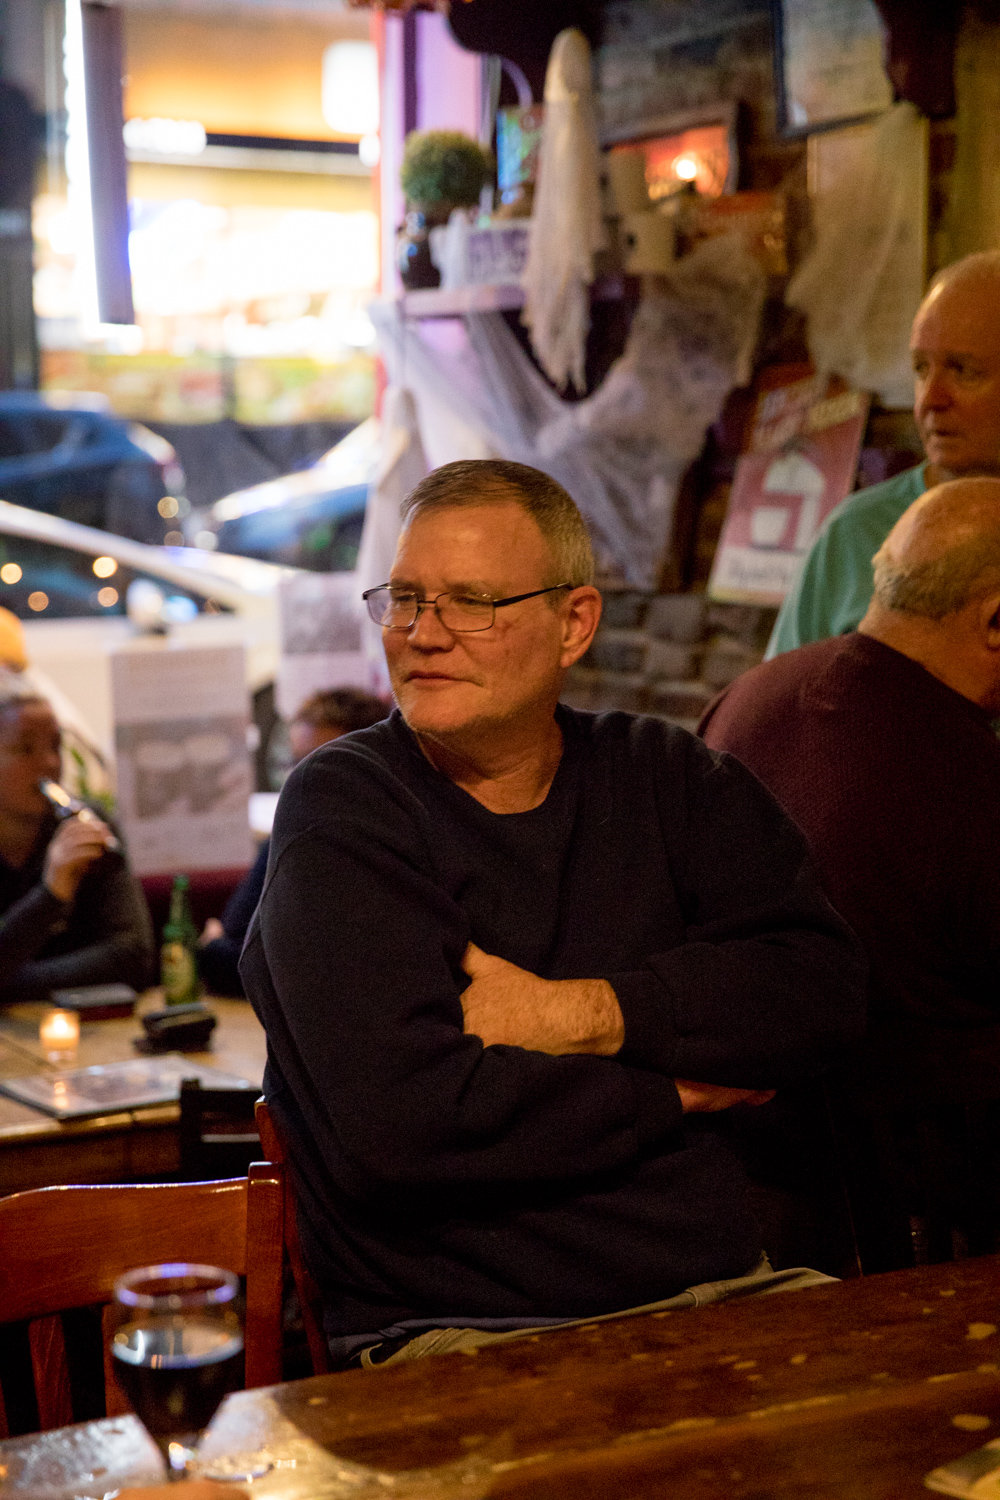 James Powers listens to Mary Courtney perform Irish music at An Beal Bocht Café on West 238th Street, where he is a regular.